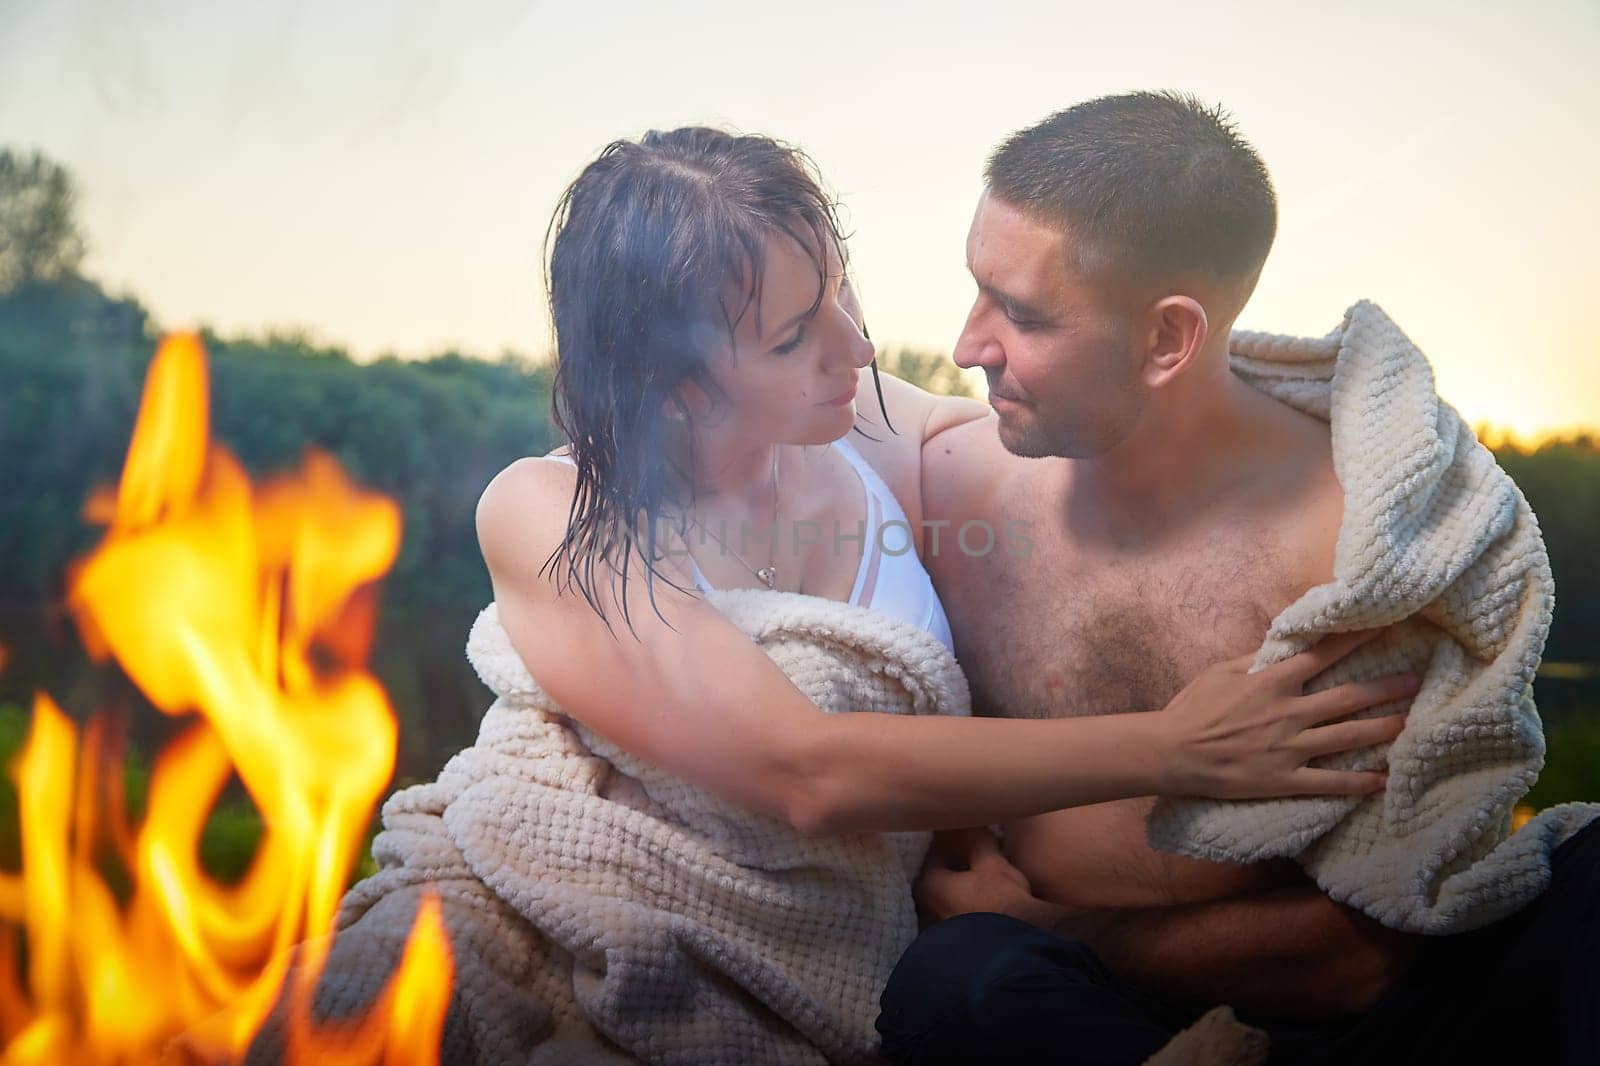 Happy Couple relaxin, having fun and hugs with fire in camping on nature near water of river or lake in summer sunny evening in sunset. Family or lovers have date and rest outdoors. Concept of love by keleny